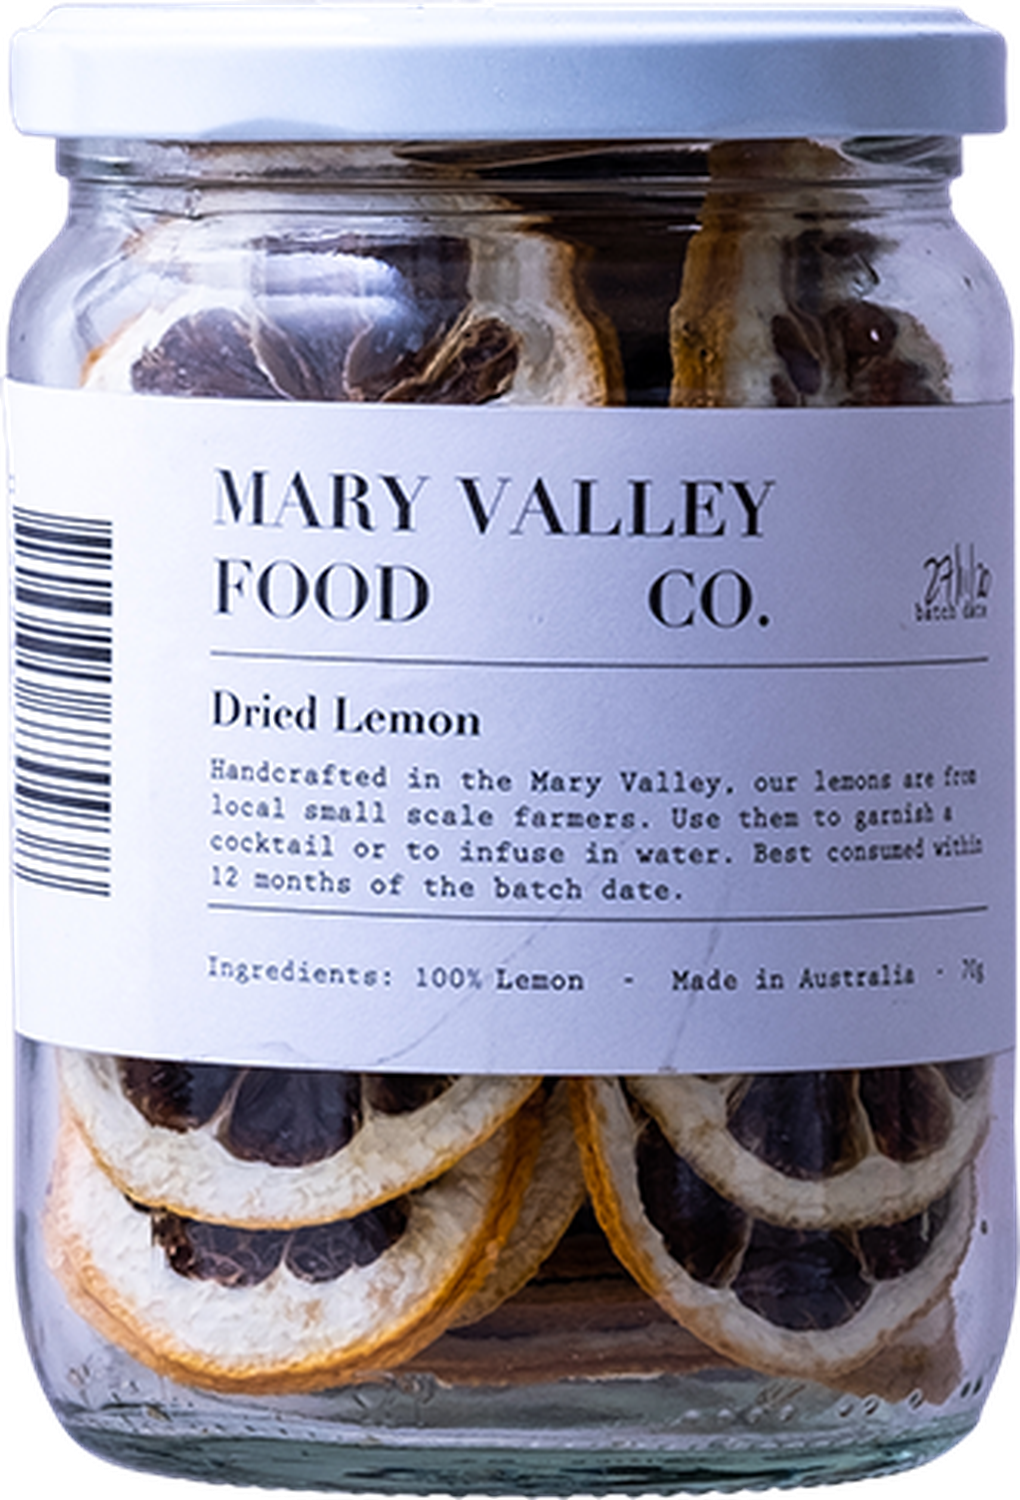 Mary Valley Food Co - Dried Lemon